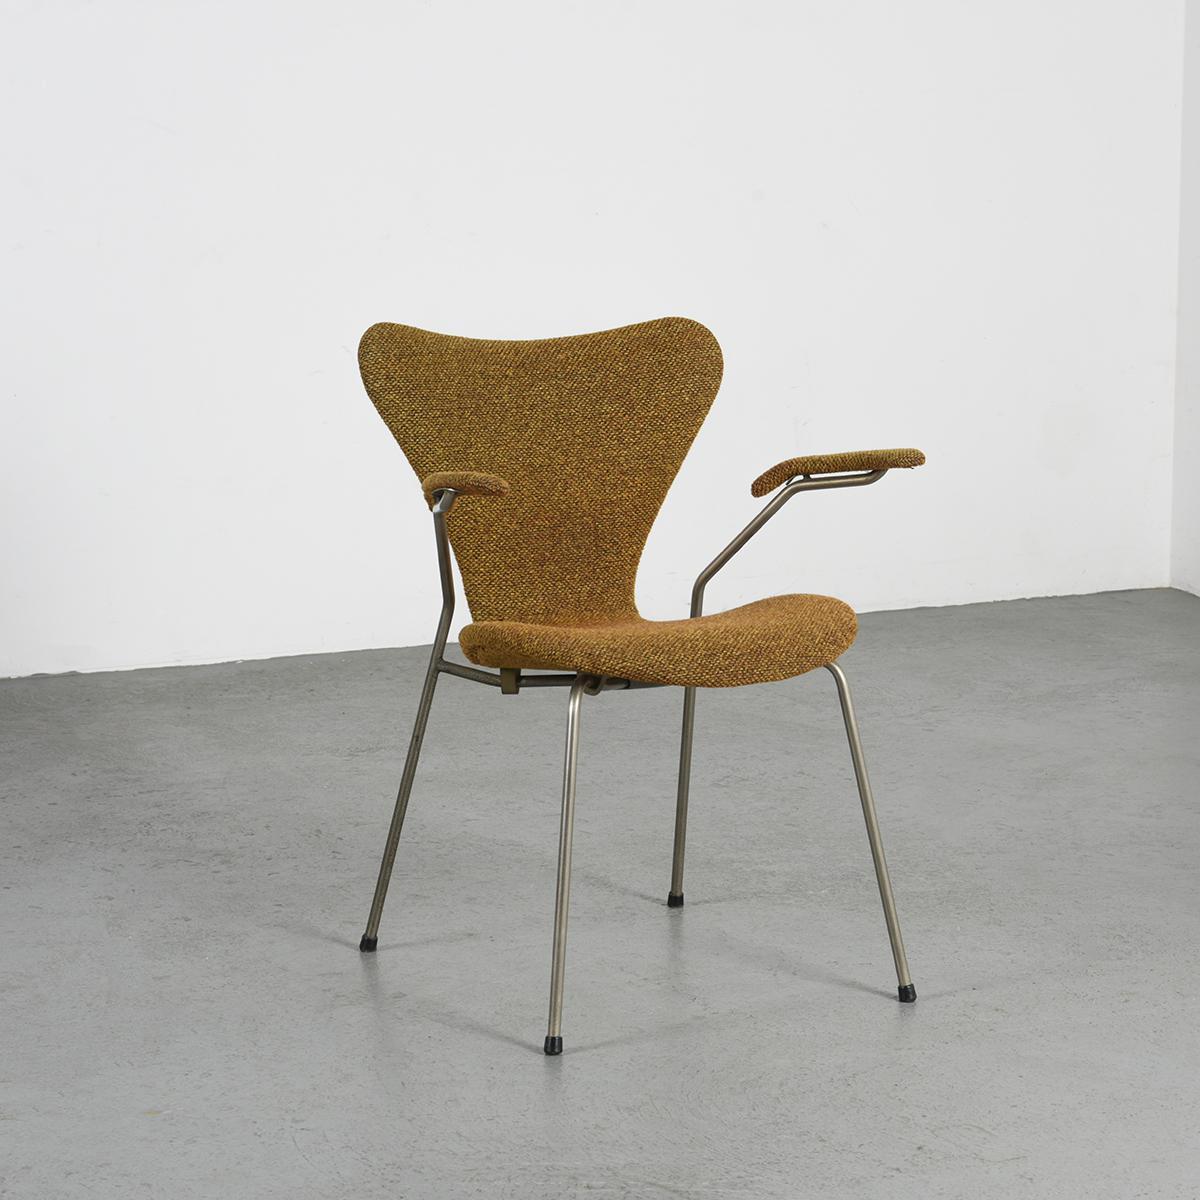 Revitalizing the renowned Arne Jacobsen armchair, the Fritz Hansen Series 7, model 3207, gains a new version, skillfully designed to elevate the comfort of this iconic chair without compromising its original allure.
This enhanced rendition features